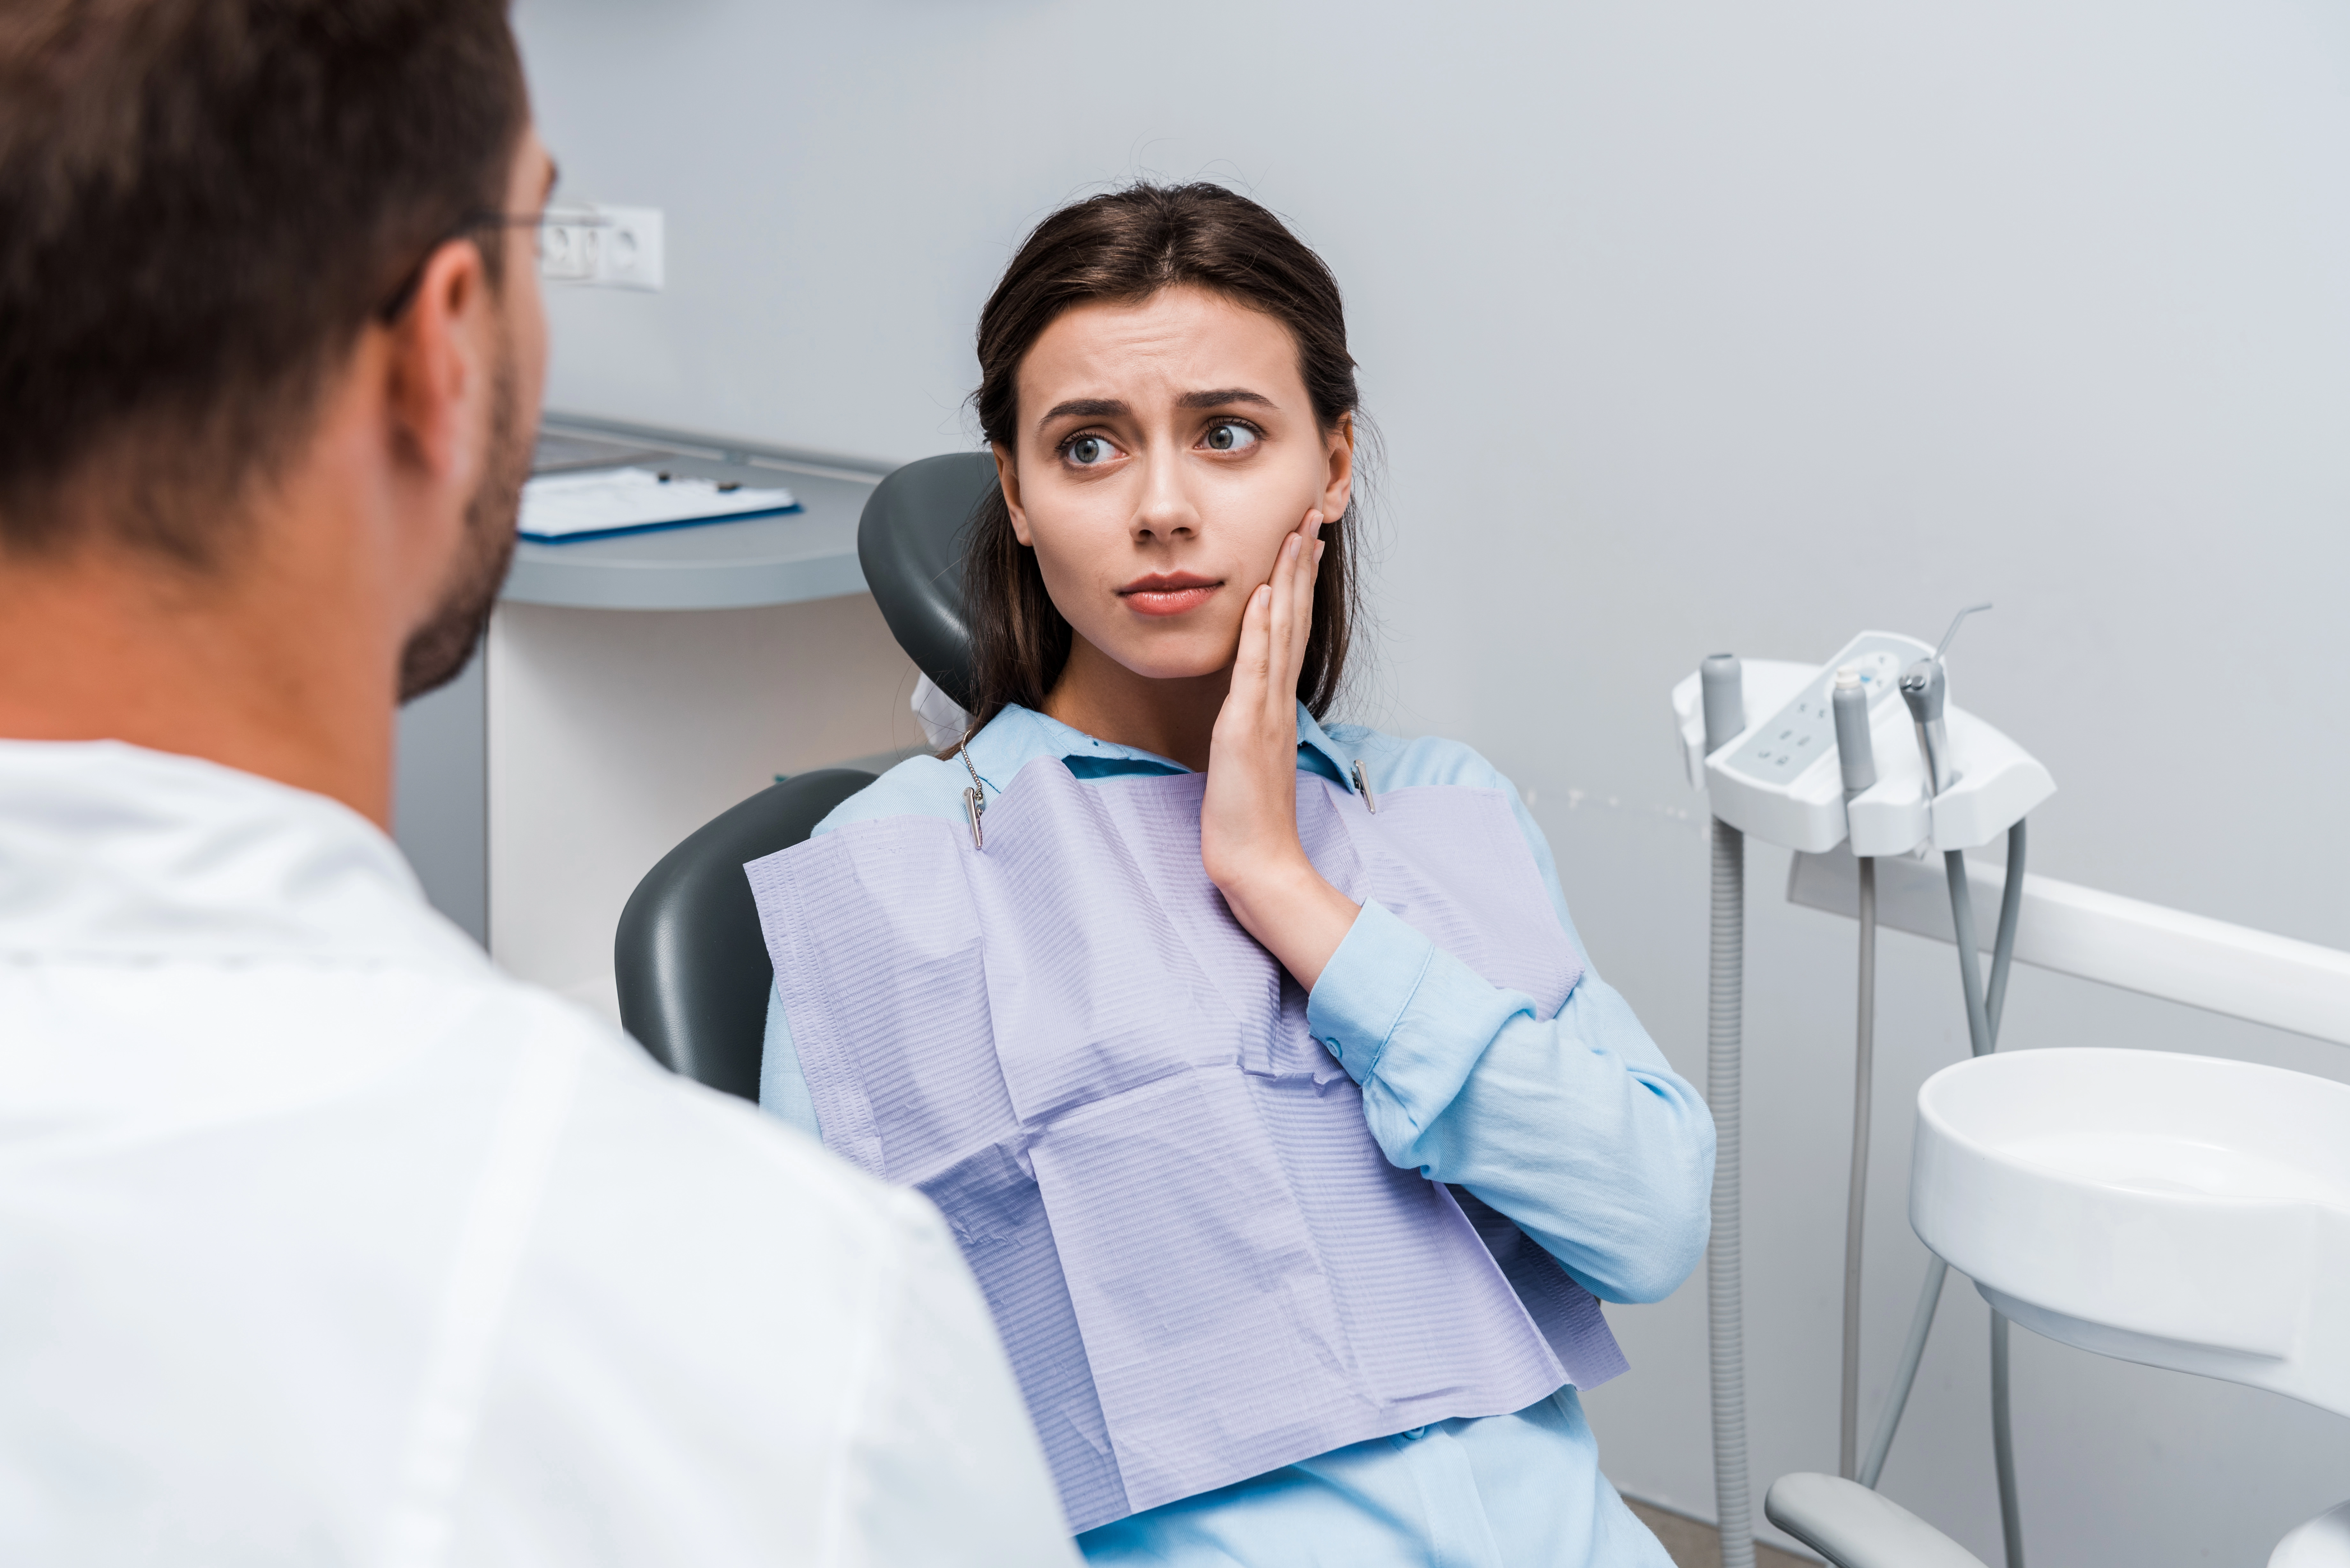 How Painful is Wisdom Teeth Extraction